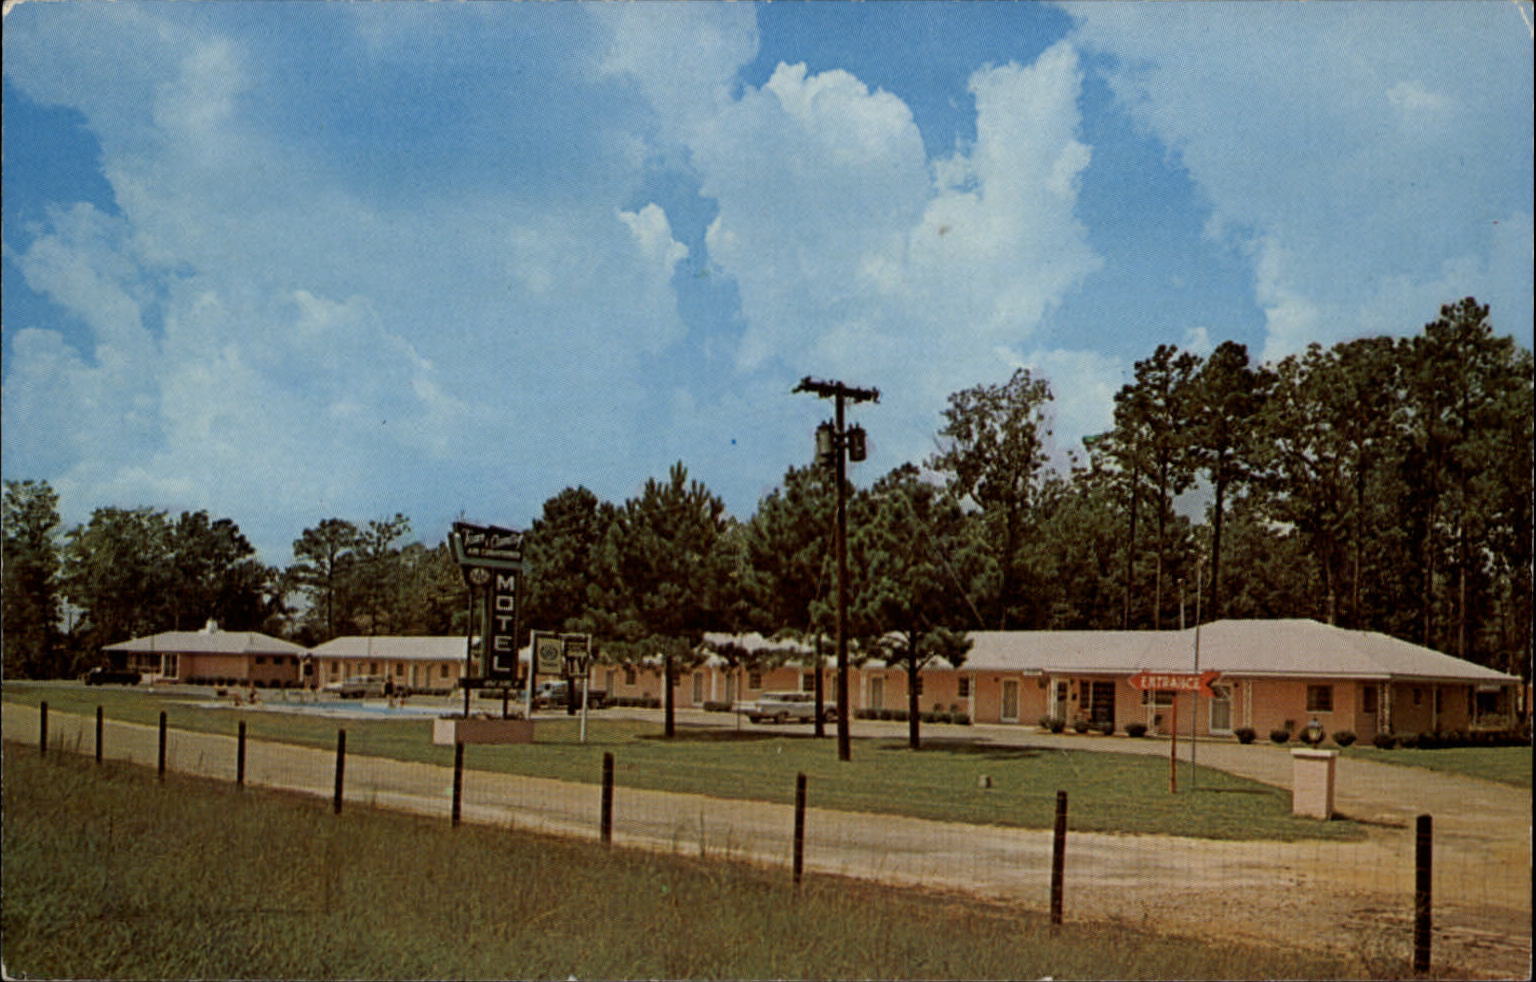 Town Country Motel Fayetteville North Carolina swimming pool ~ dated 1972